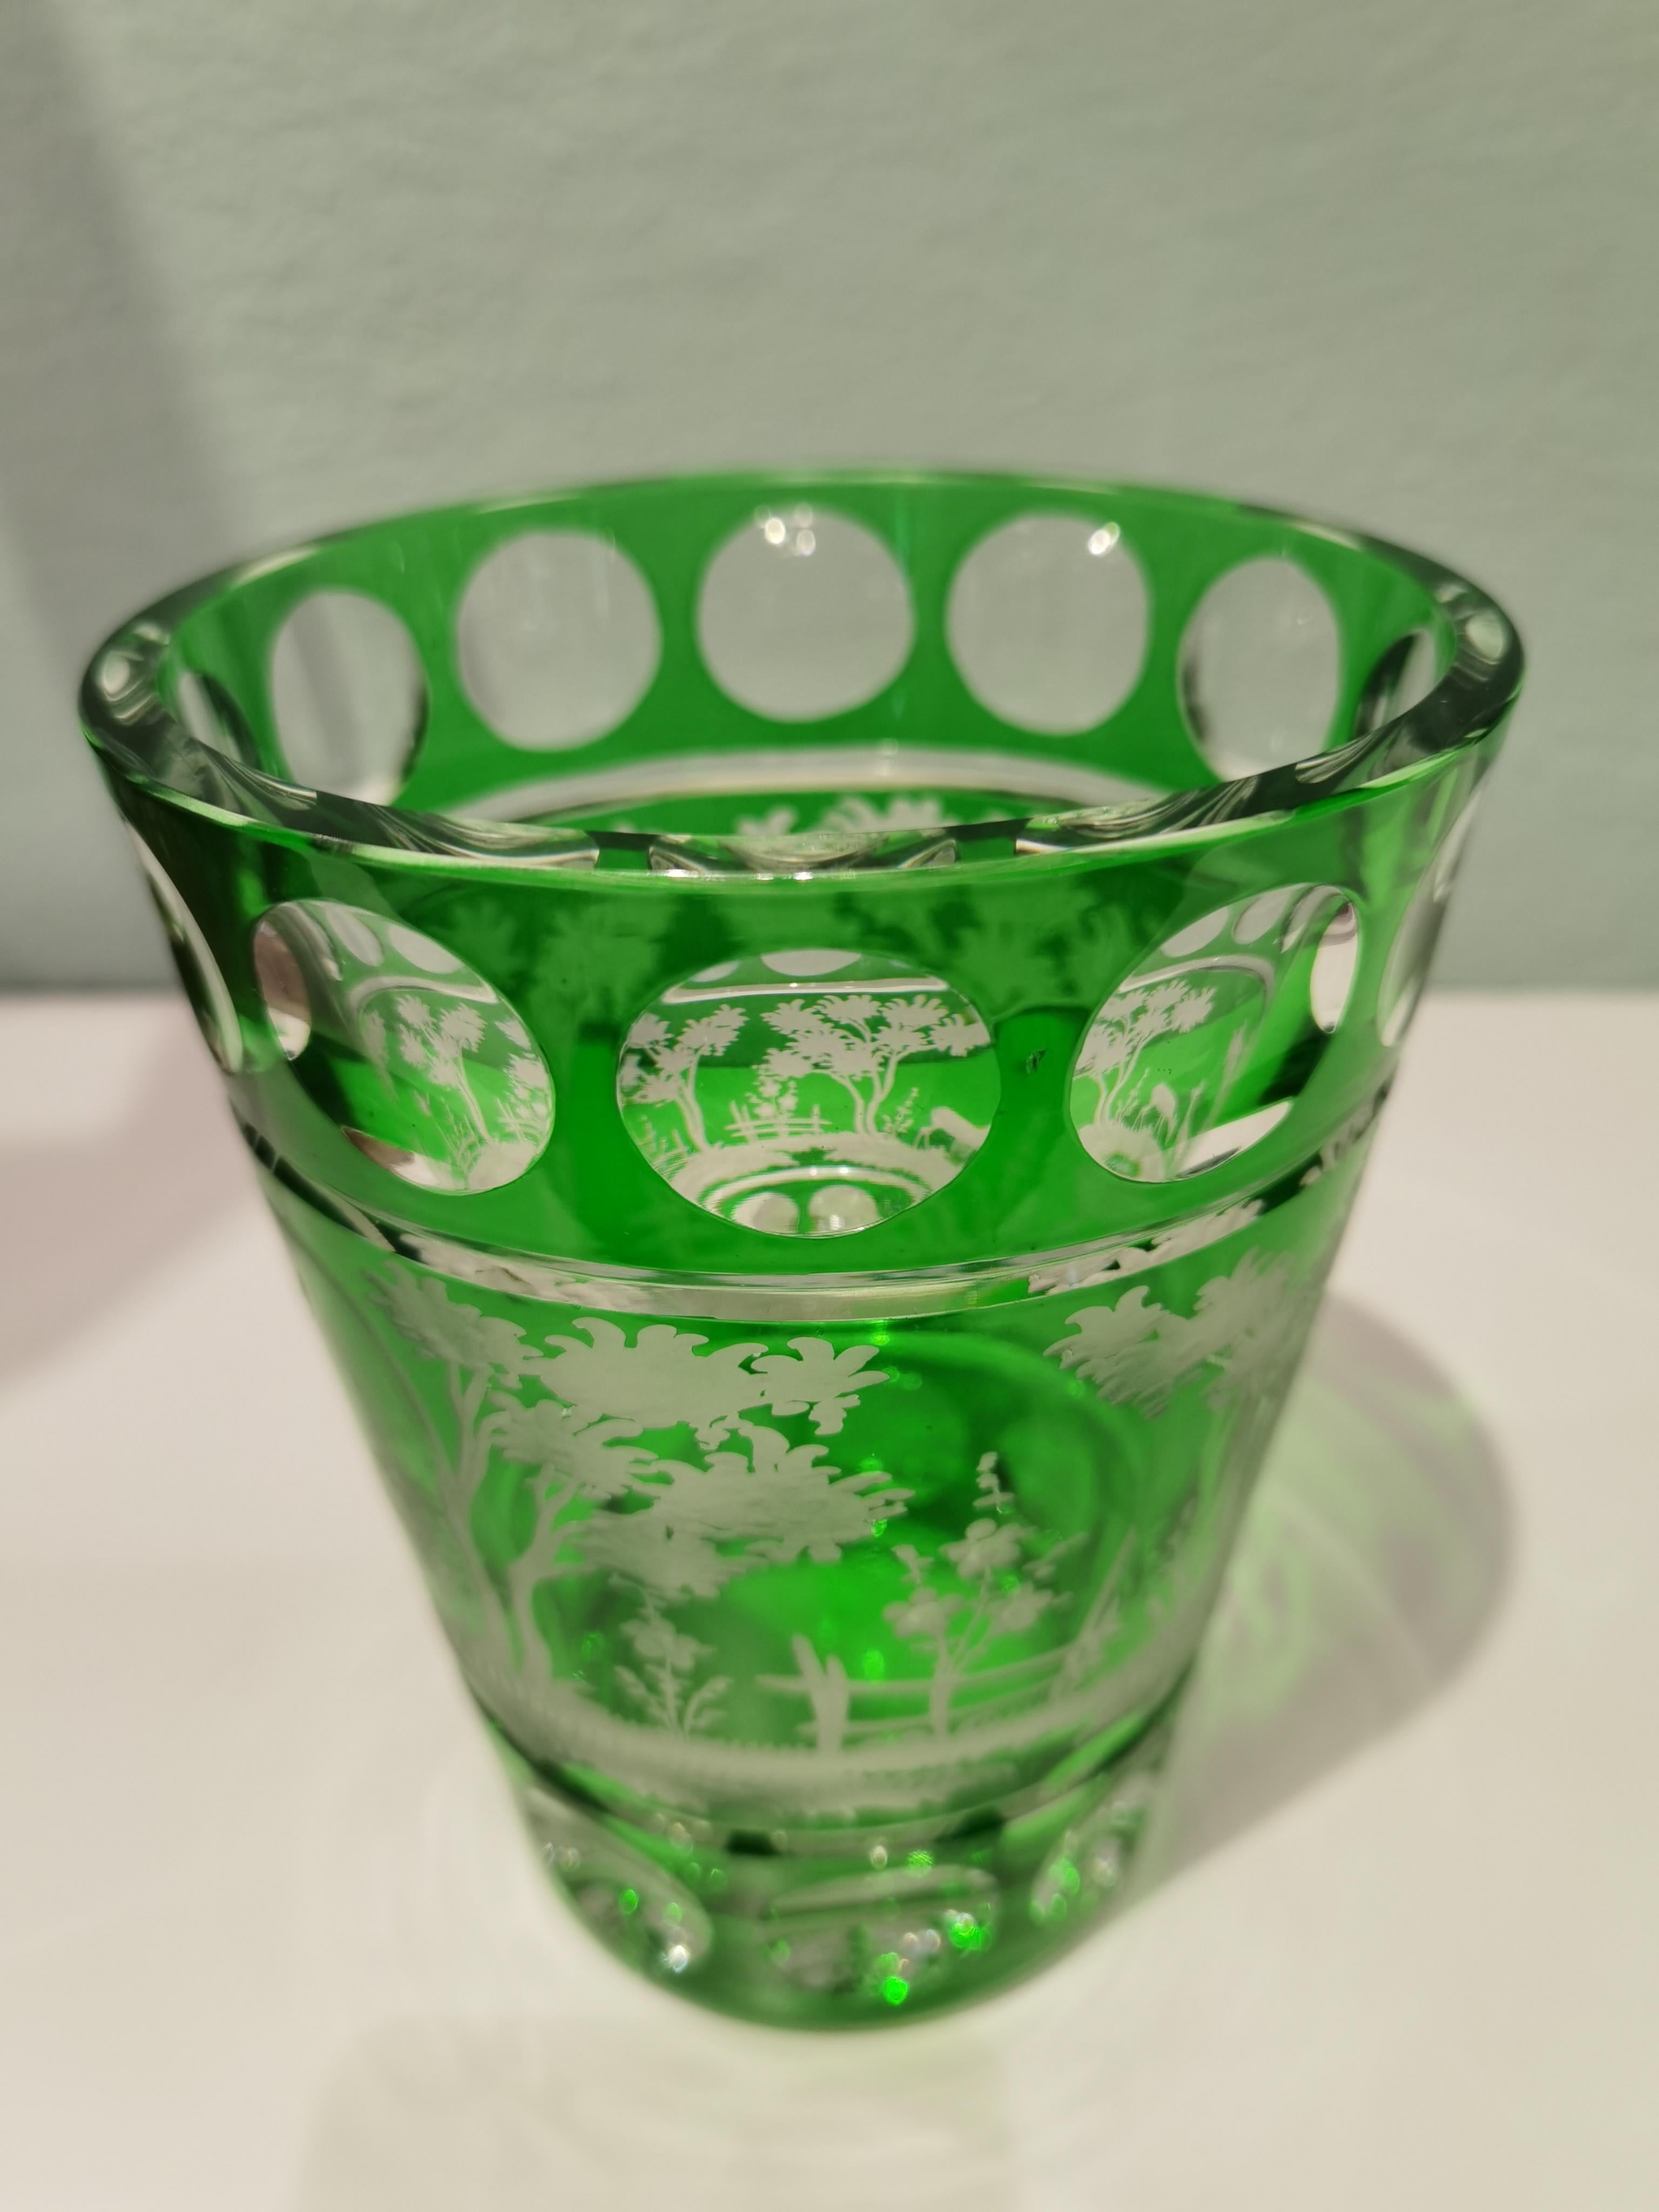 Hand blown crystal vase in green glass with a country style decor all around. The leaves, bunny and deers are hand-engraved by glass artists in Bavaria/Germany. The glass here shown comes in a green color and can be ordered in different colors like